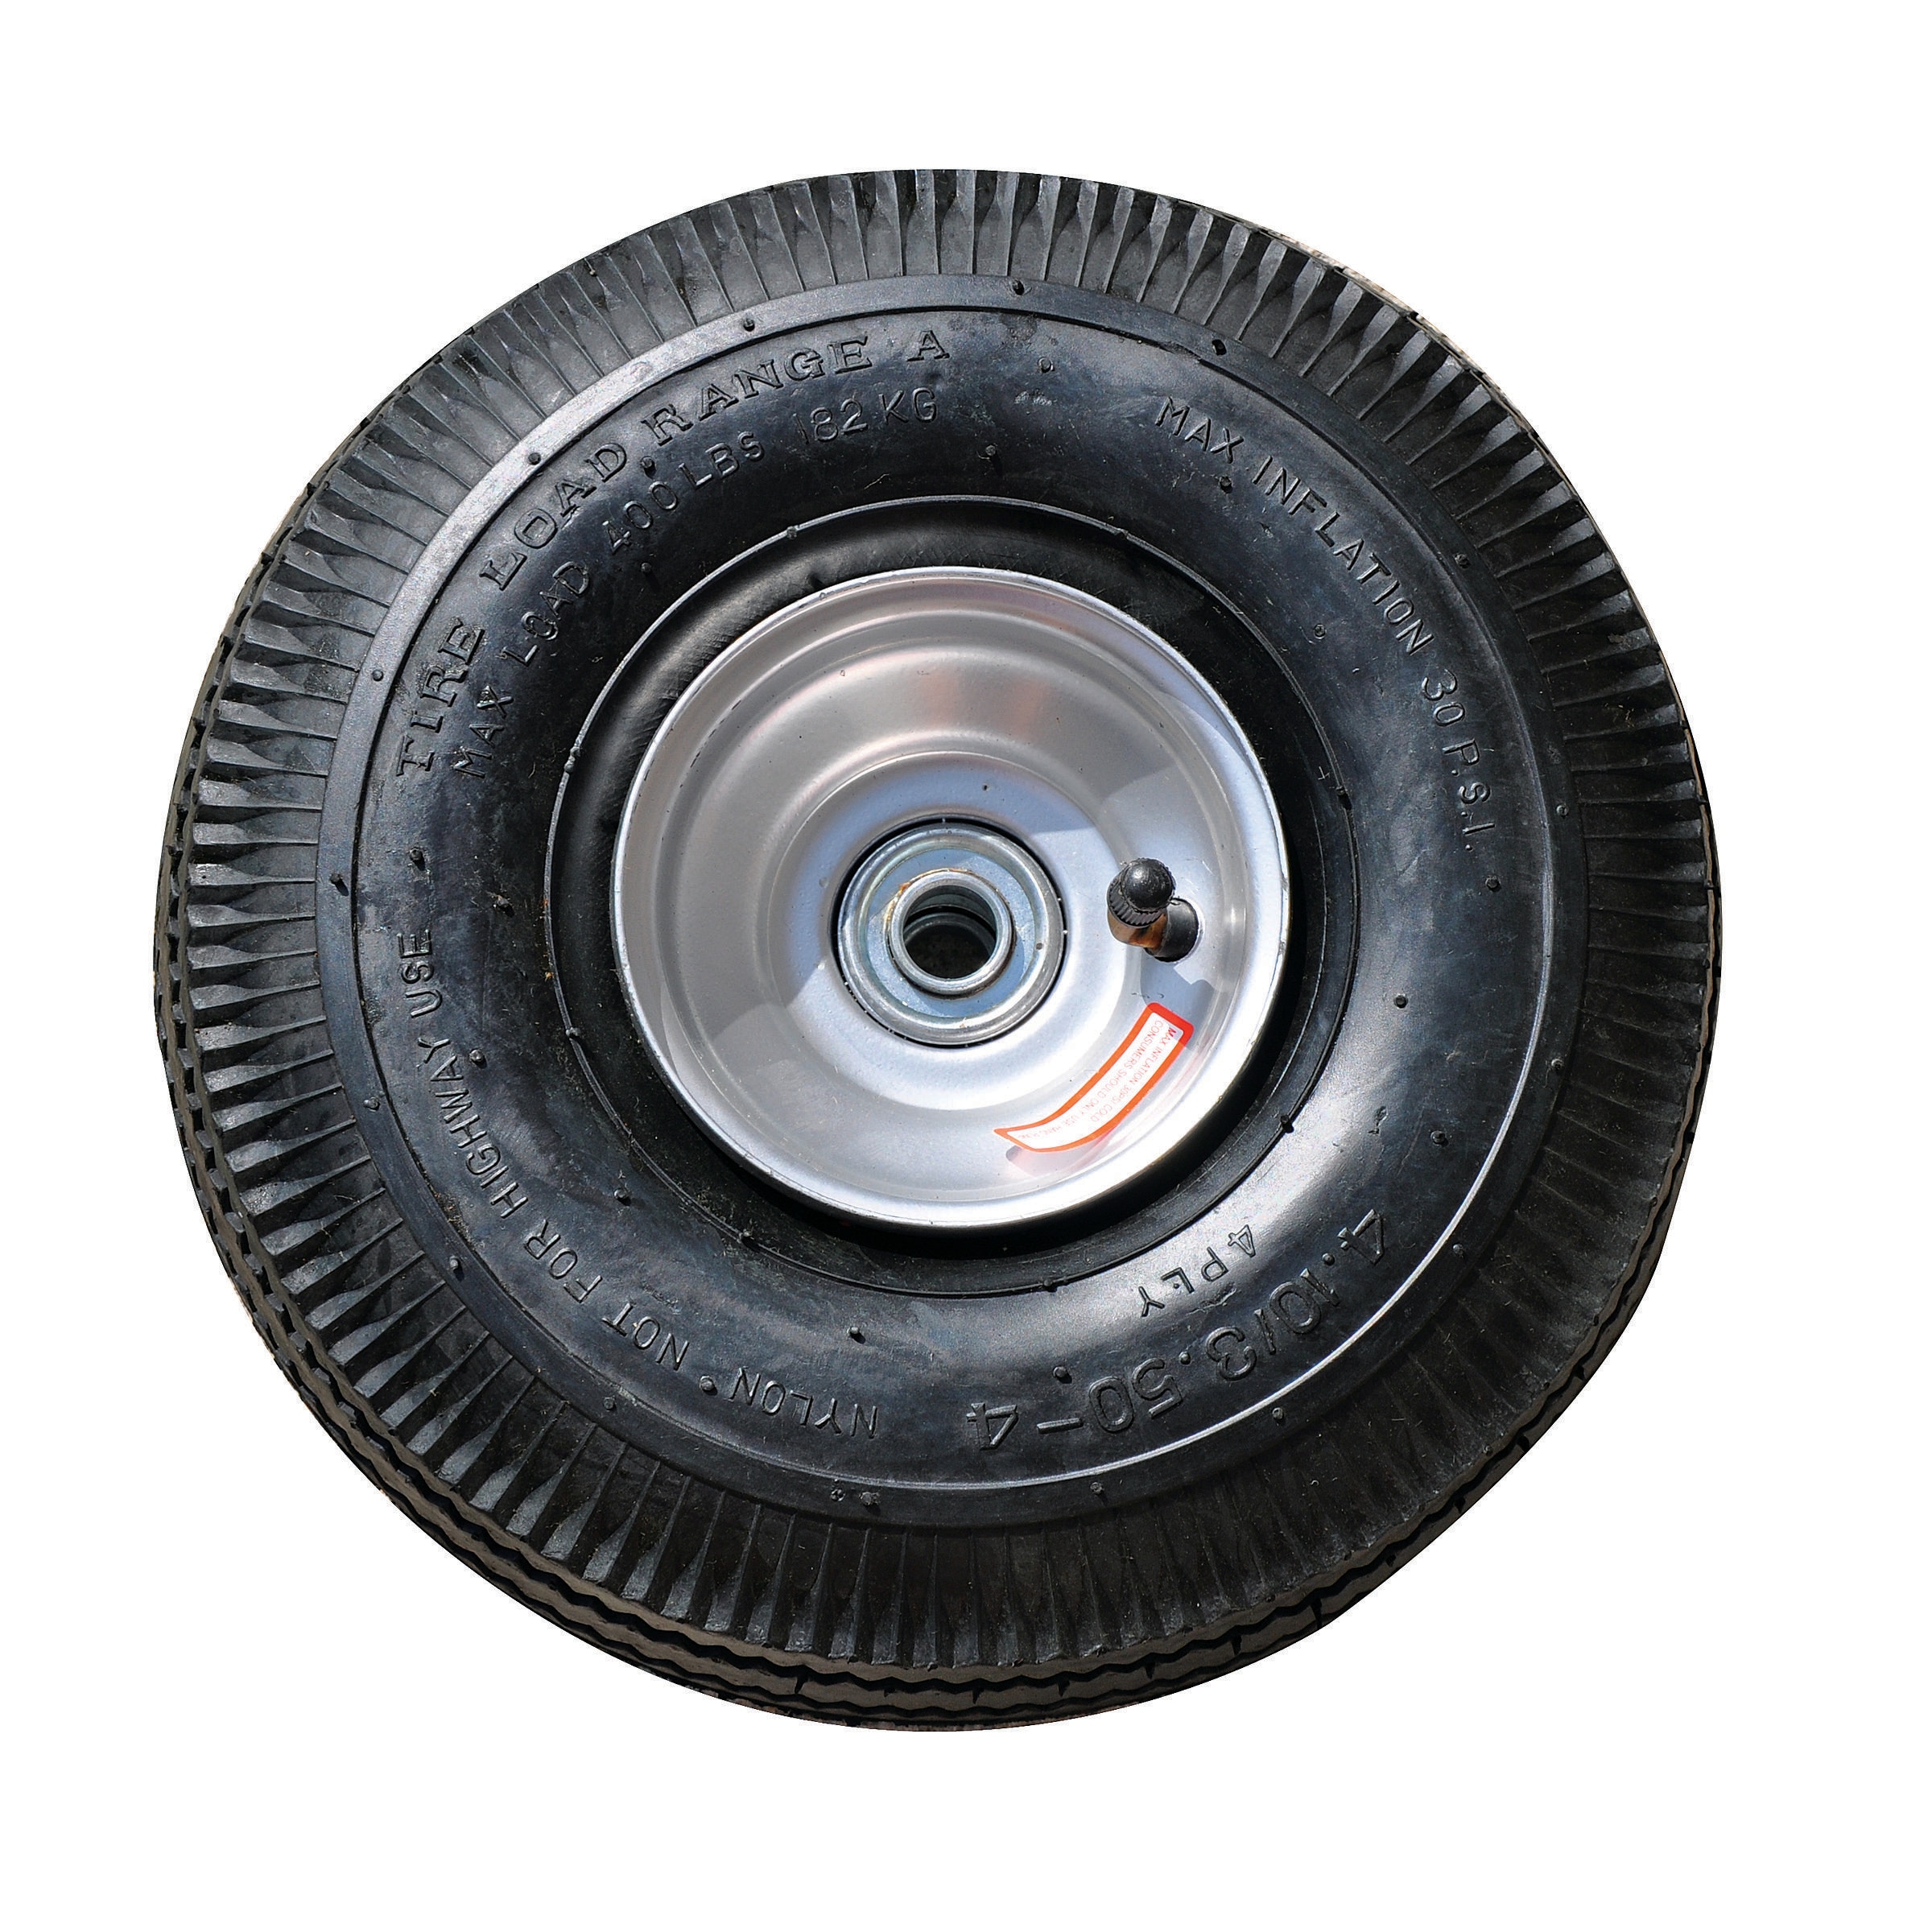  Cooler Replacement Wheels - 3.5 Inch Cooler Rollers